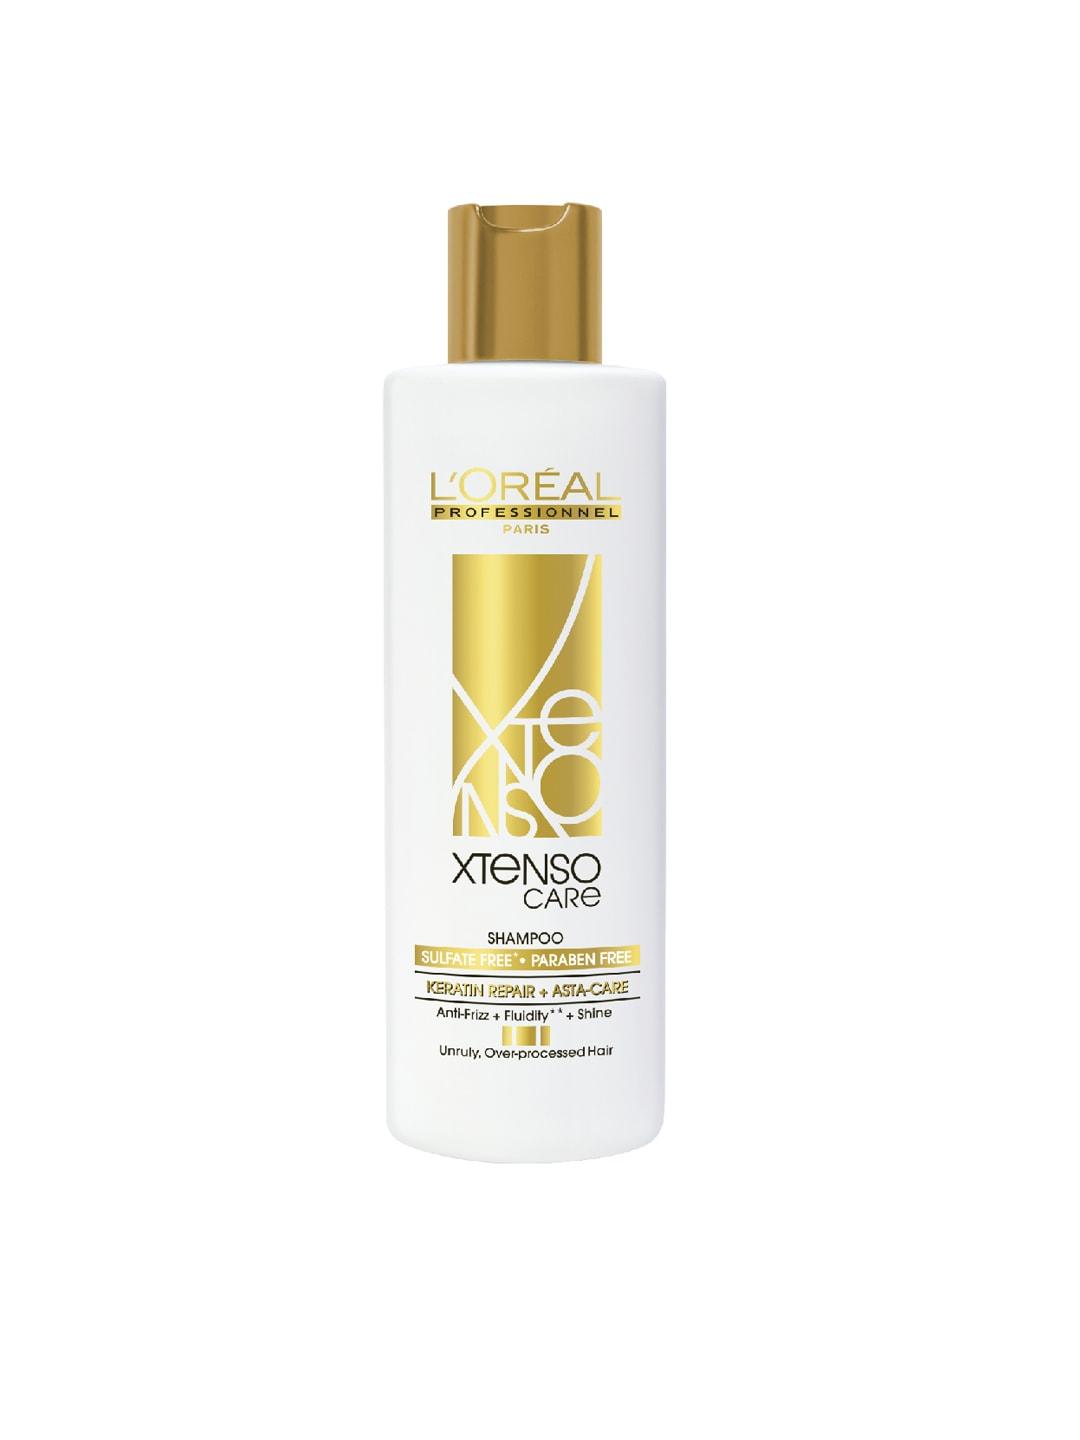 LOreal Professionnel Xtenso Care Shampoo with Keratin repair for Straightened Hair-250ml